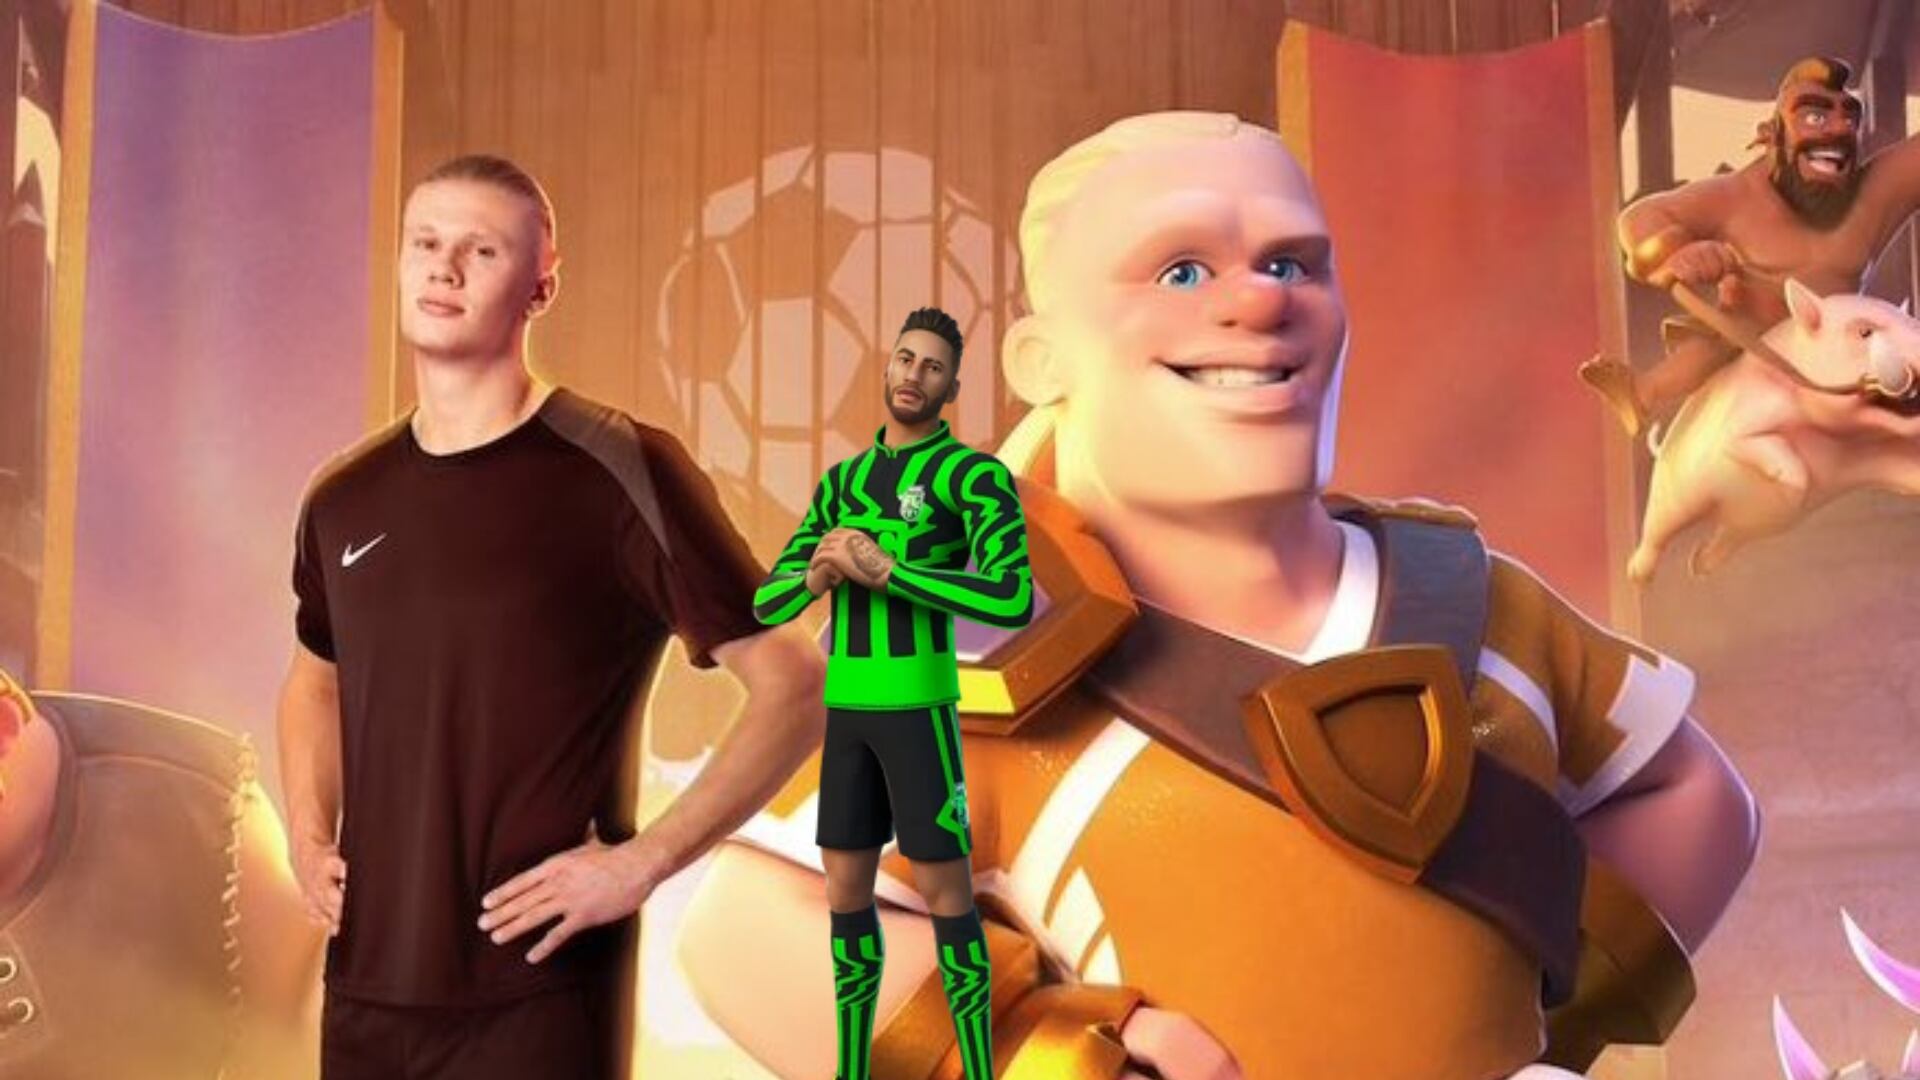 As Neymar in Fortnite, the millionaire contract of Haaland for appearing as a character in Clash of Clans